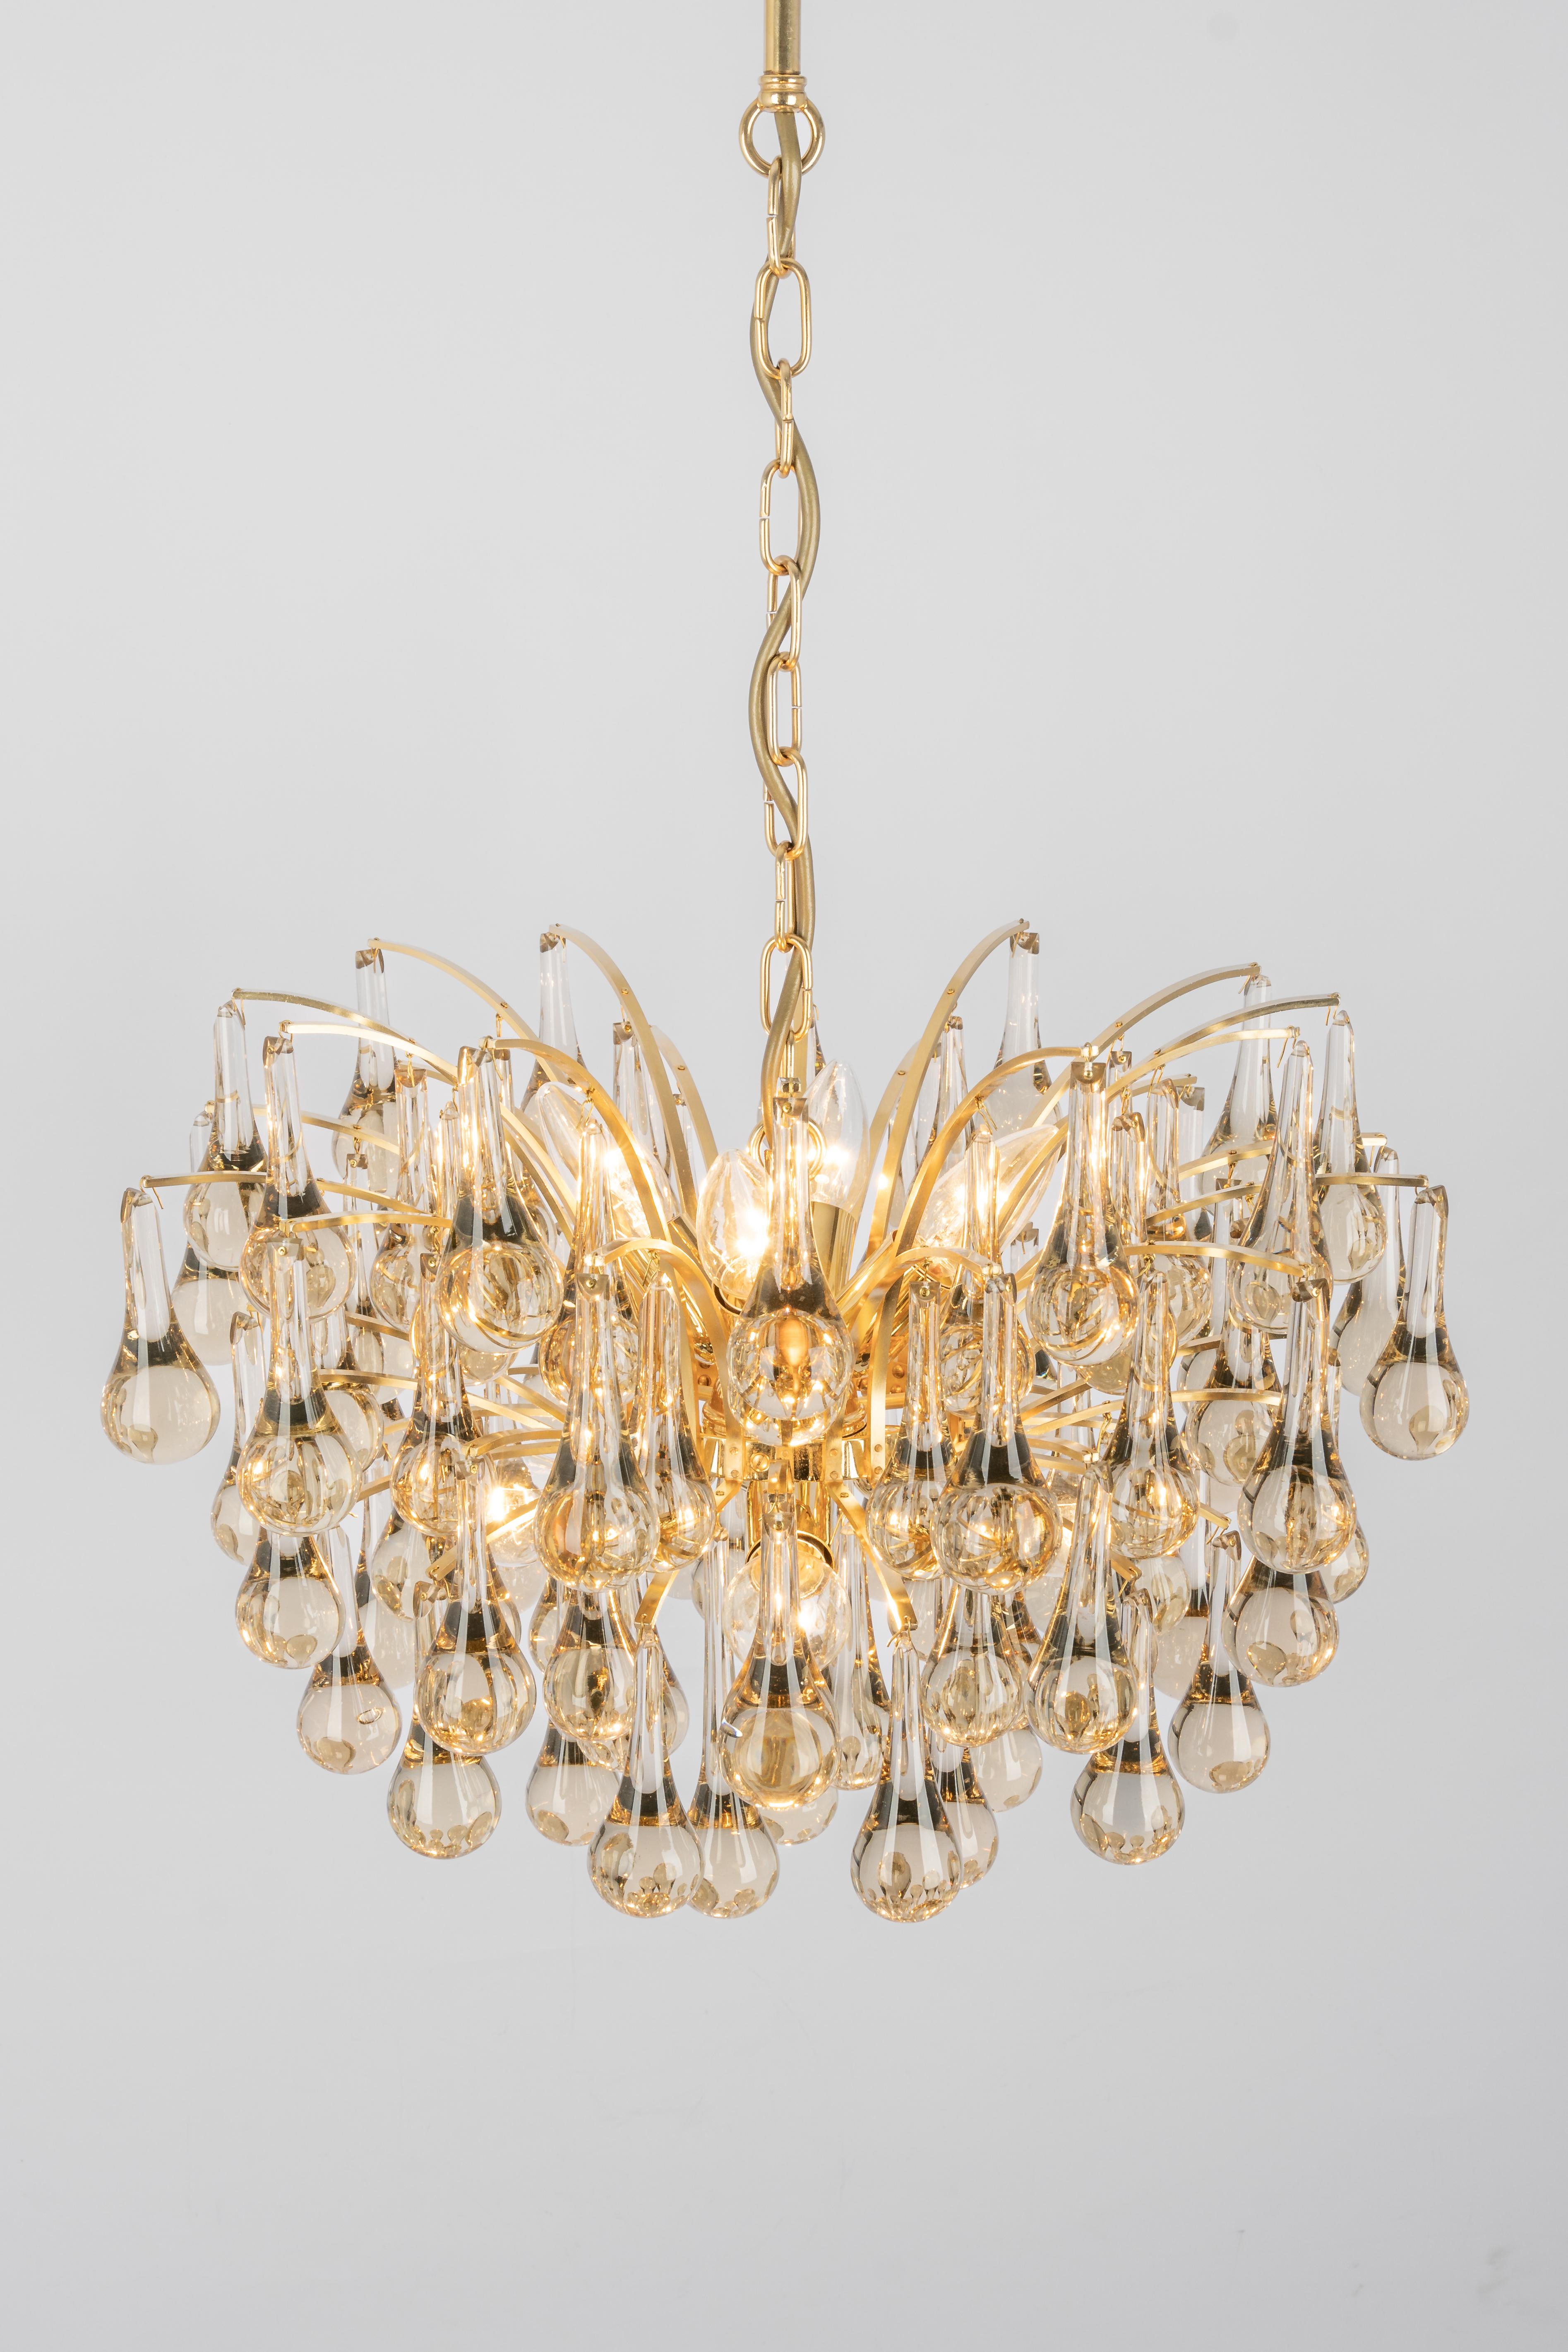 Large Murano Glass Tear Drop Chandelier, Christoph Palme, Germany, 1970s For Sale 3